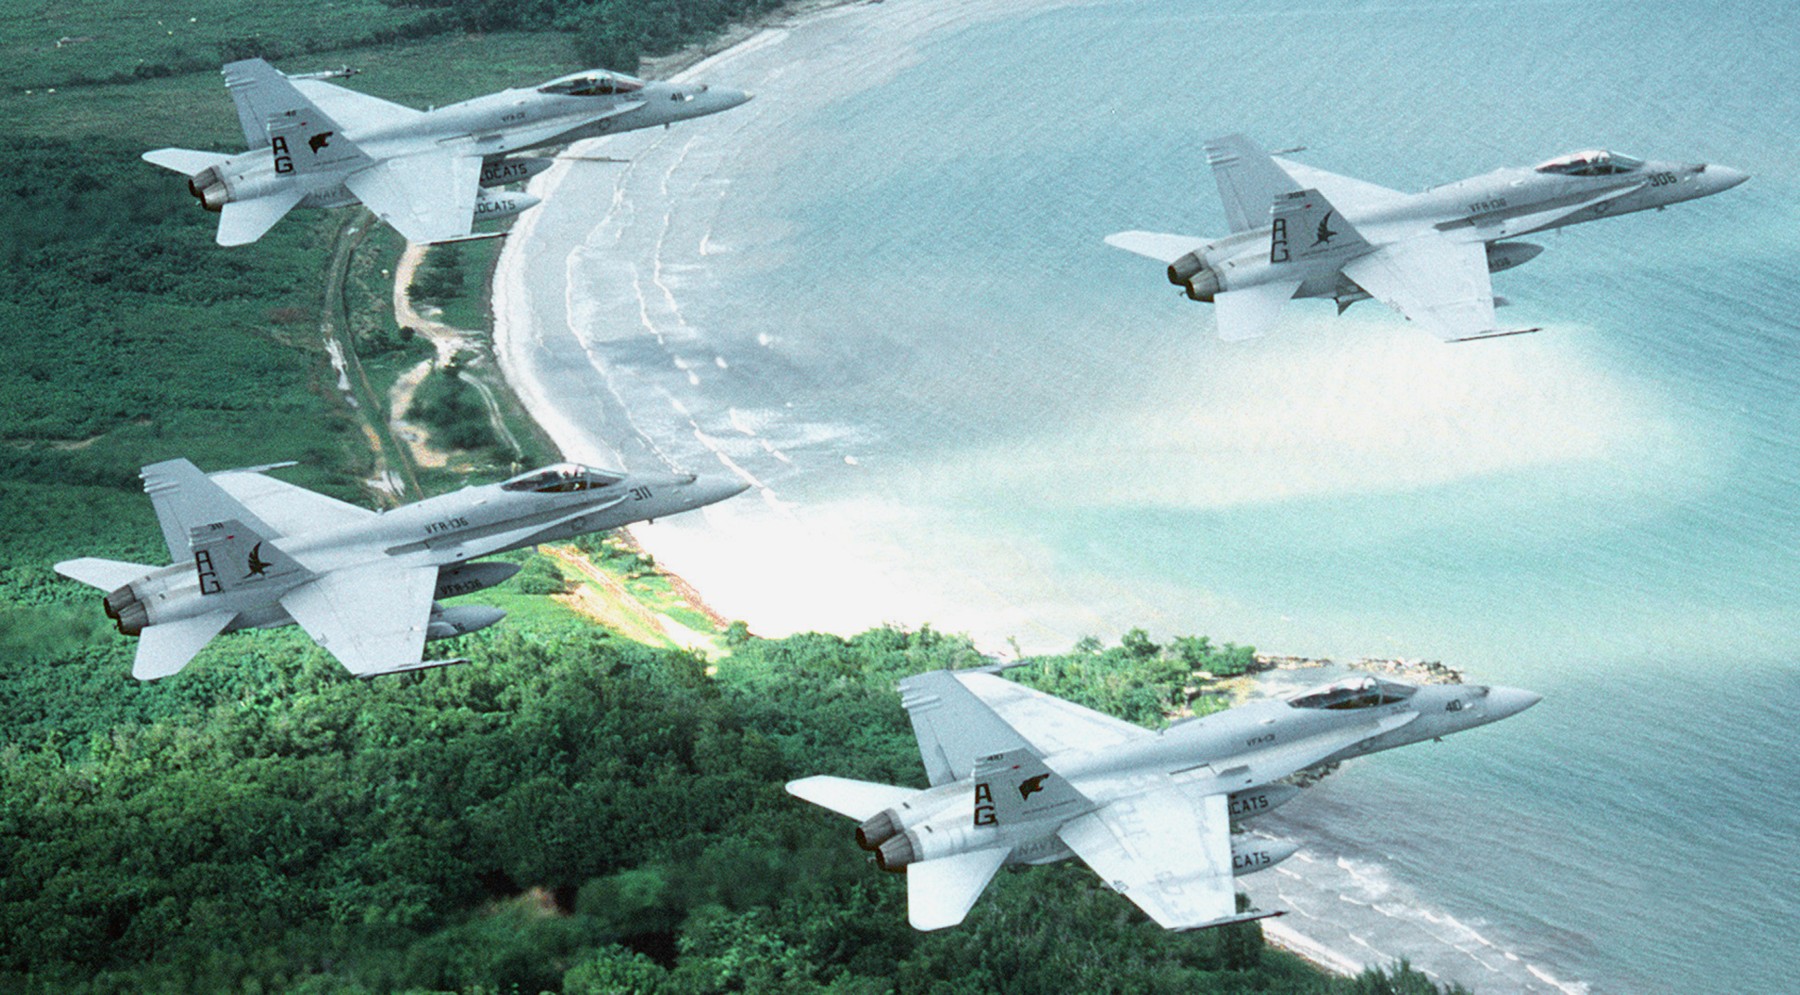 vfa-131 wildcats strike fighter squadron f/a-18c hornet naval station roosevelt roads puerto rico 1992 124